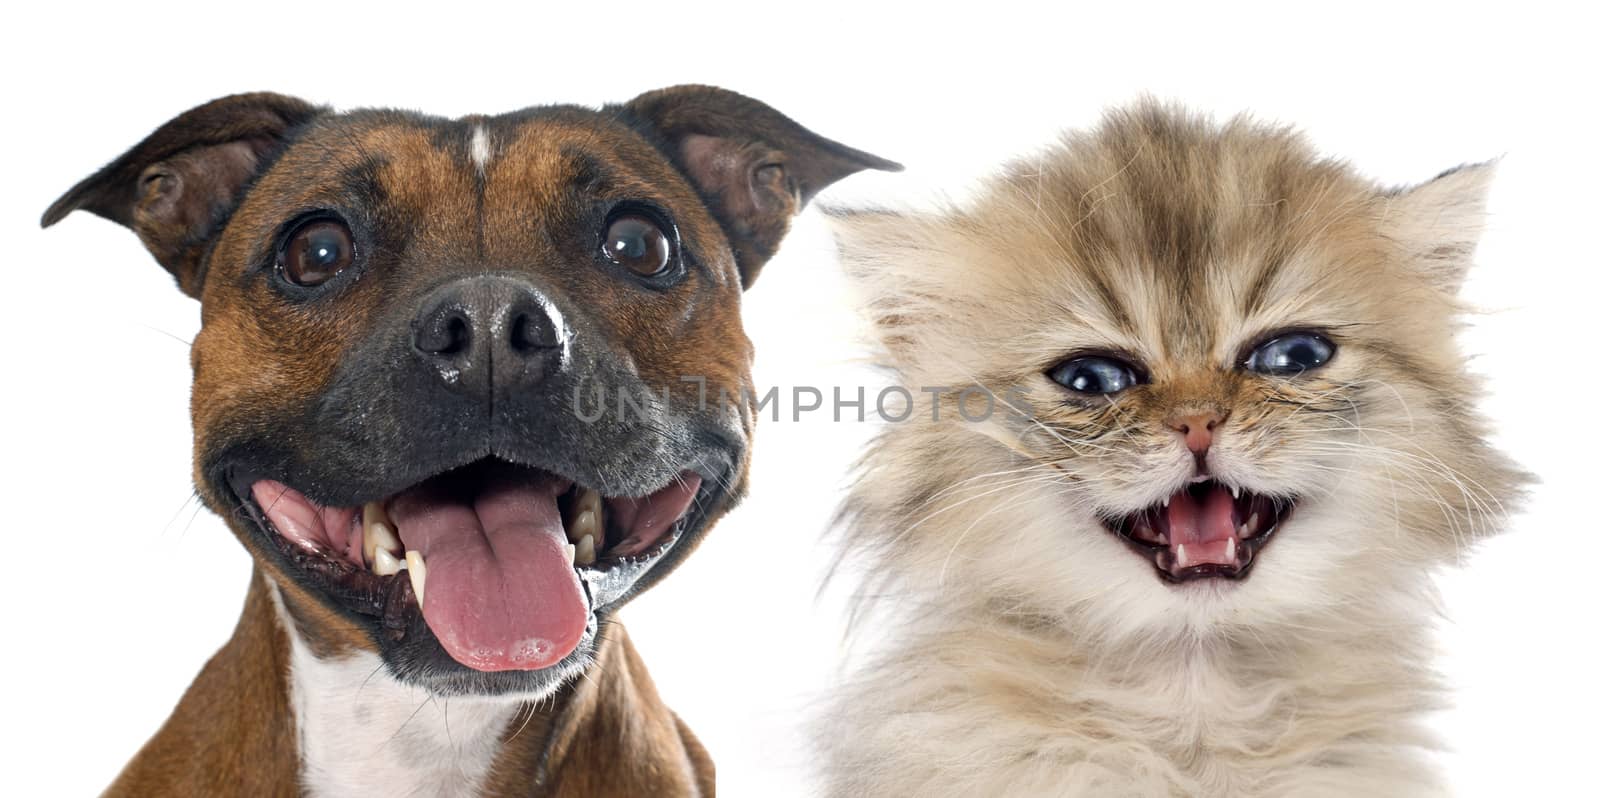 stafforshire bull terrier and persian kitten by cynoclub